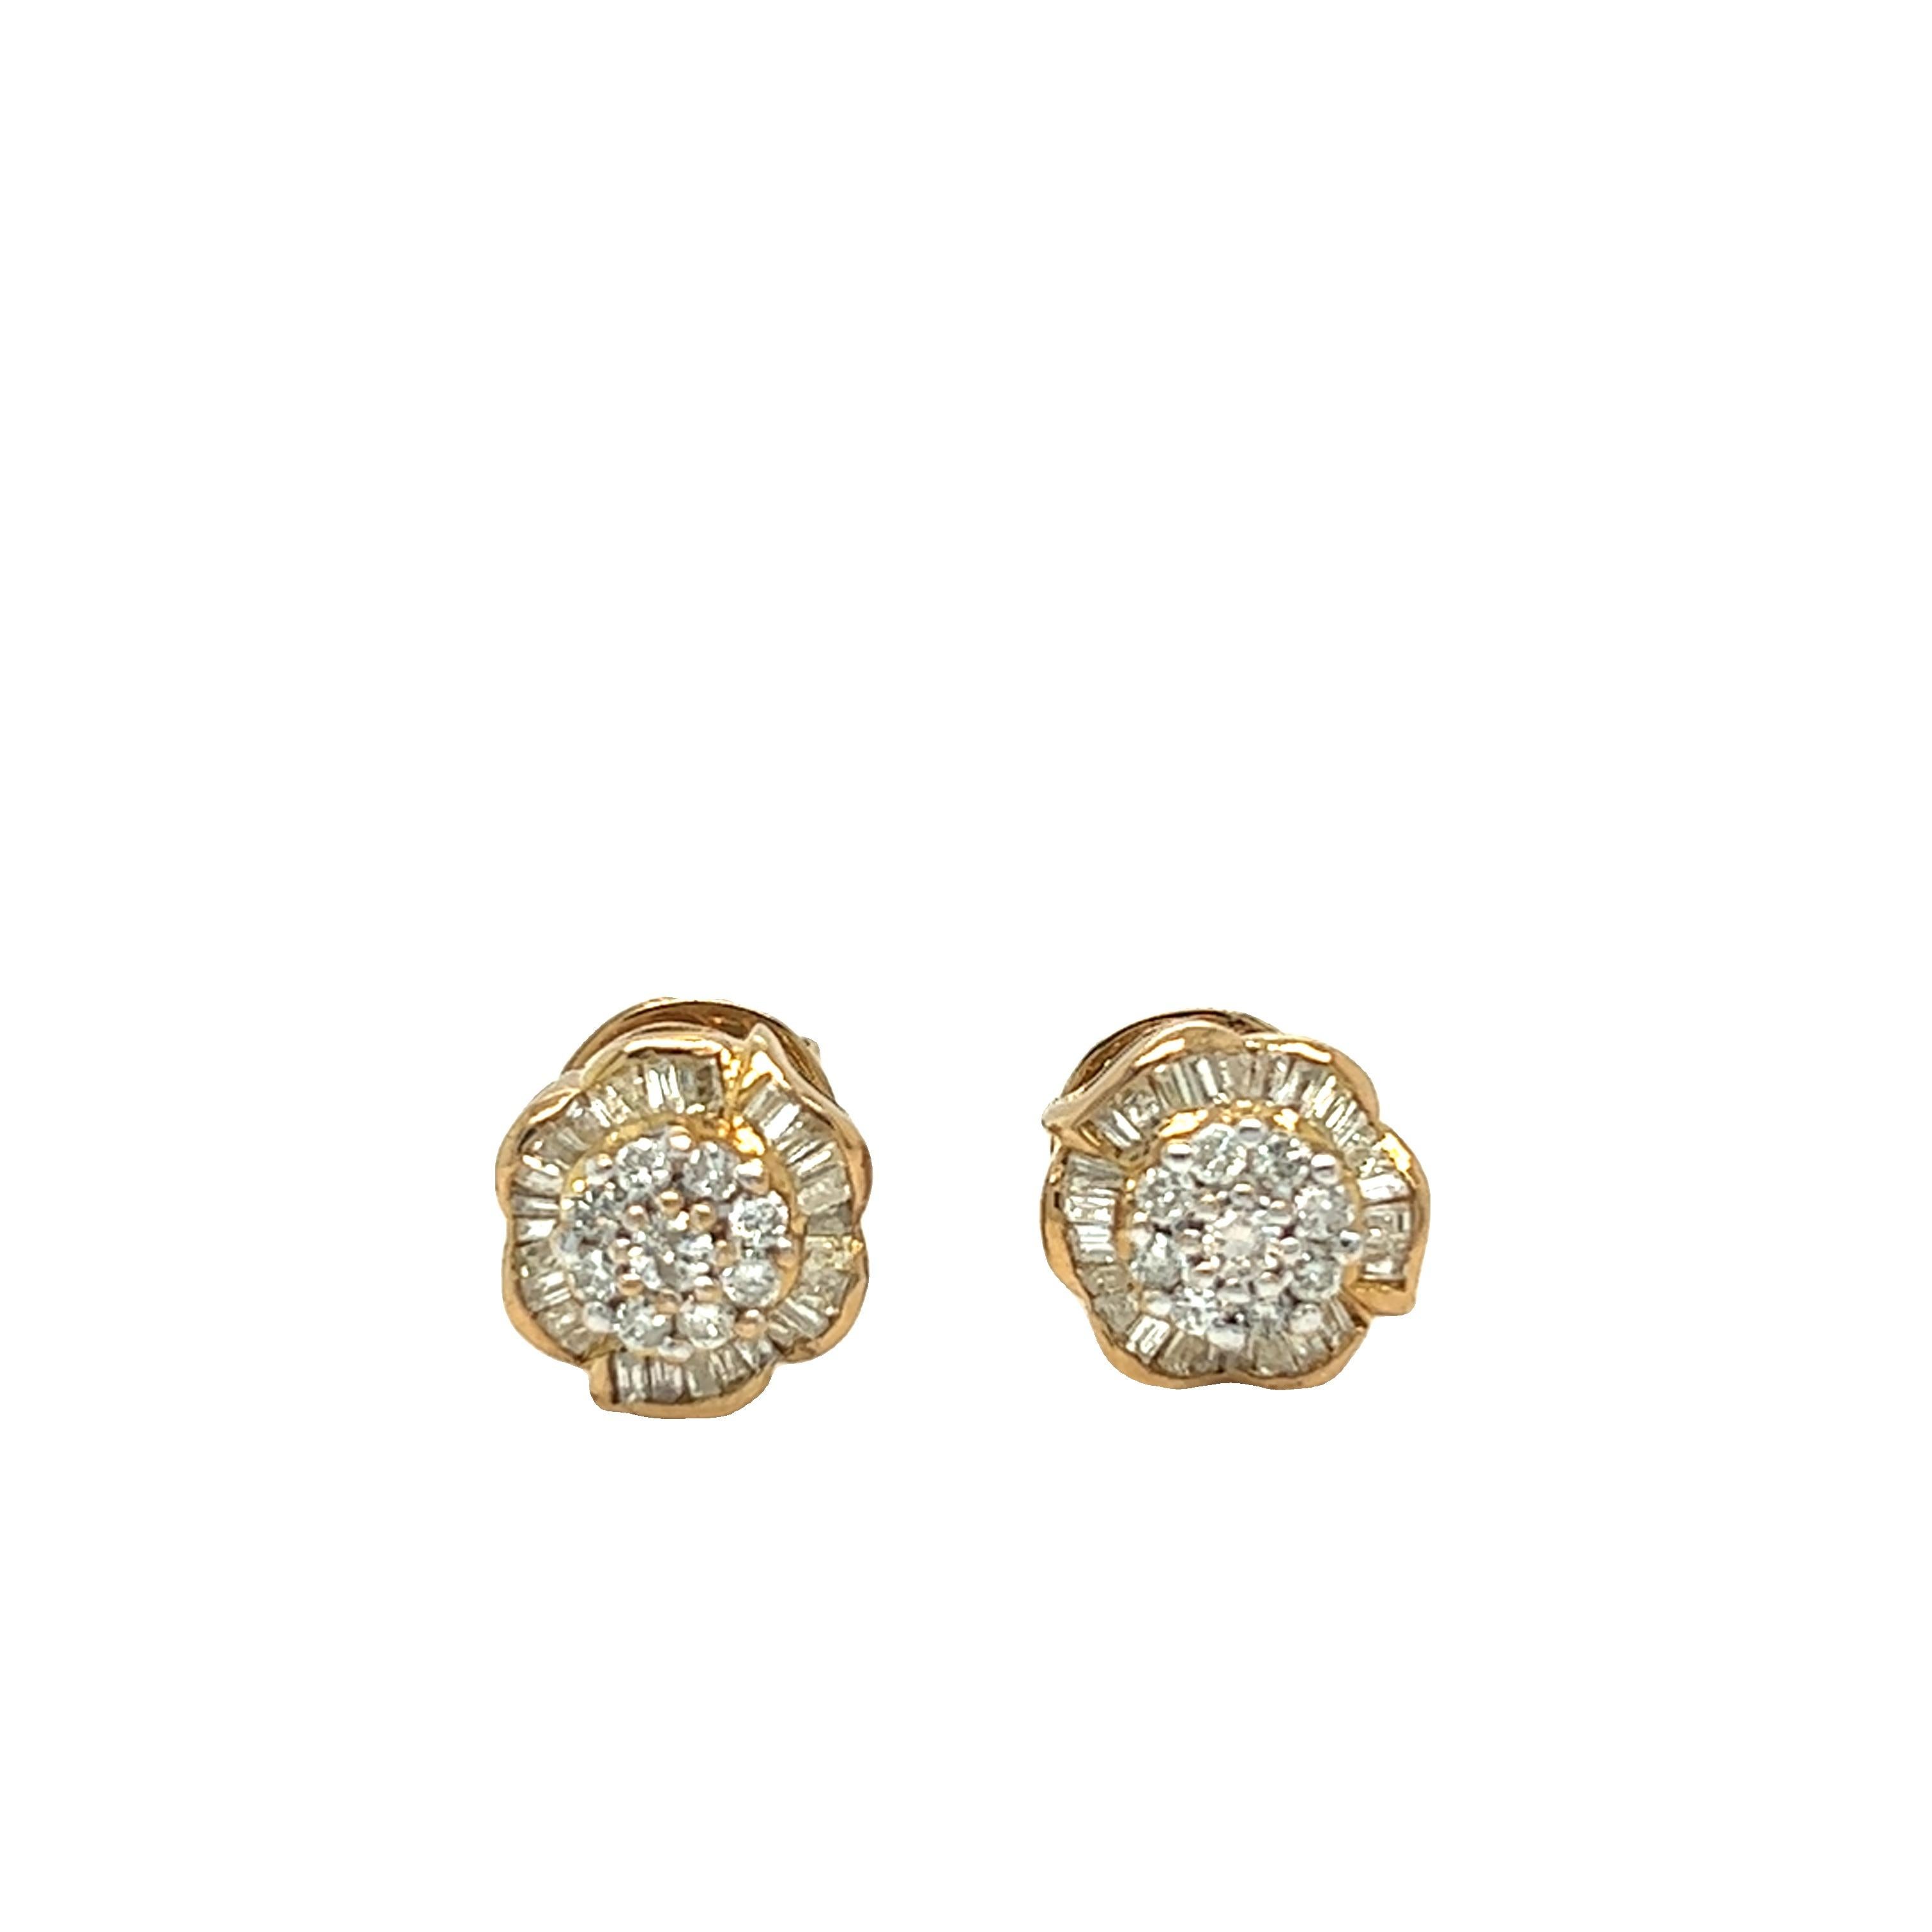 Just the right amount of sparkles, these vintage flower inspired stud earrings feature 18 round brilliant cut diamonds and fifty six baguette cut diamonds, weighing approximately 2.50 carats total. Push Backs.

Gemstone: Diamond
Weight: 2.50 carats